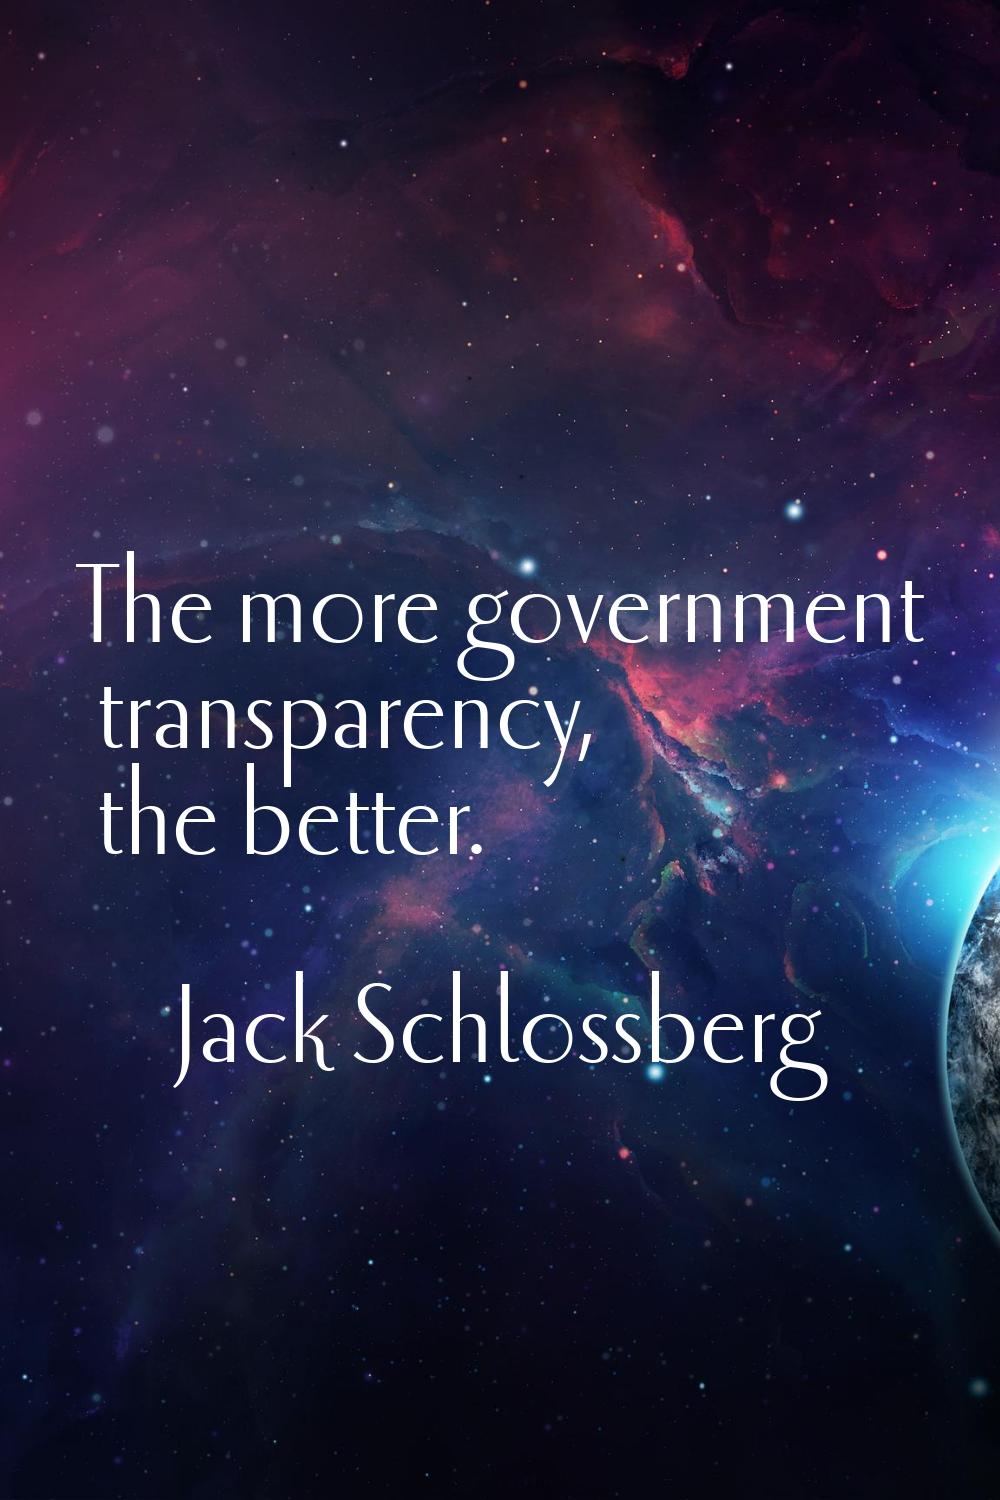 The more government transparency, the better.